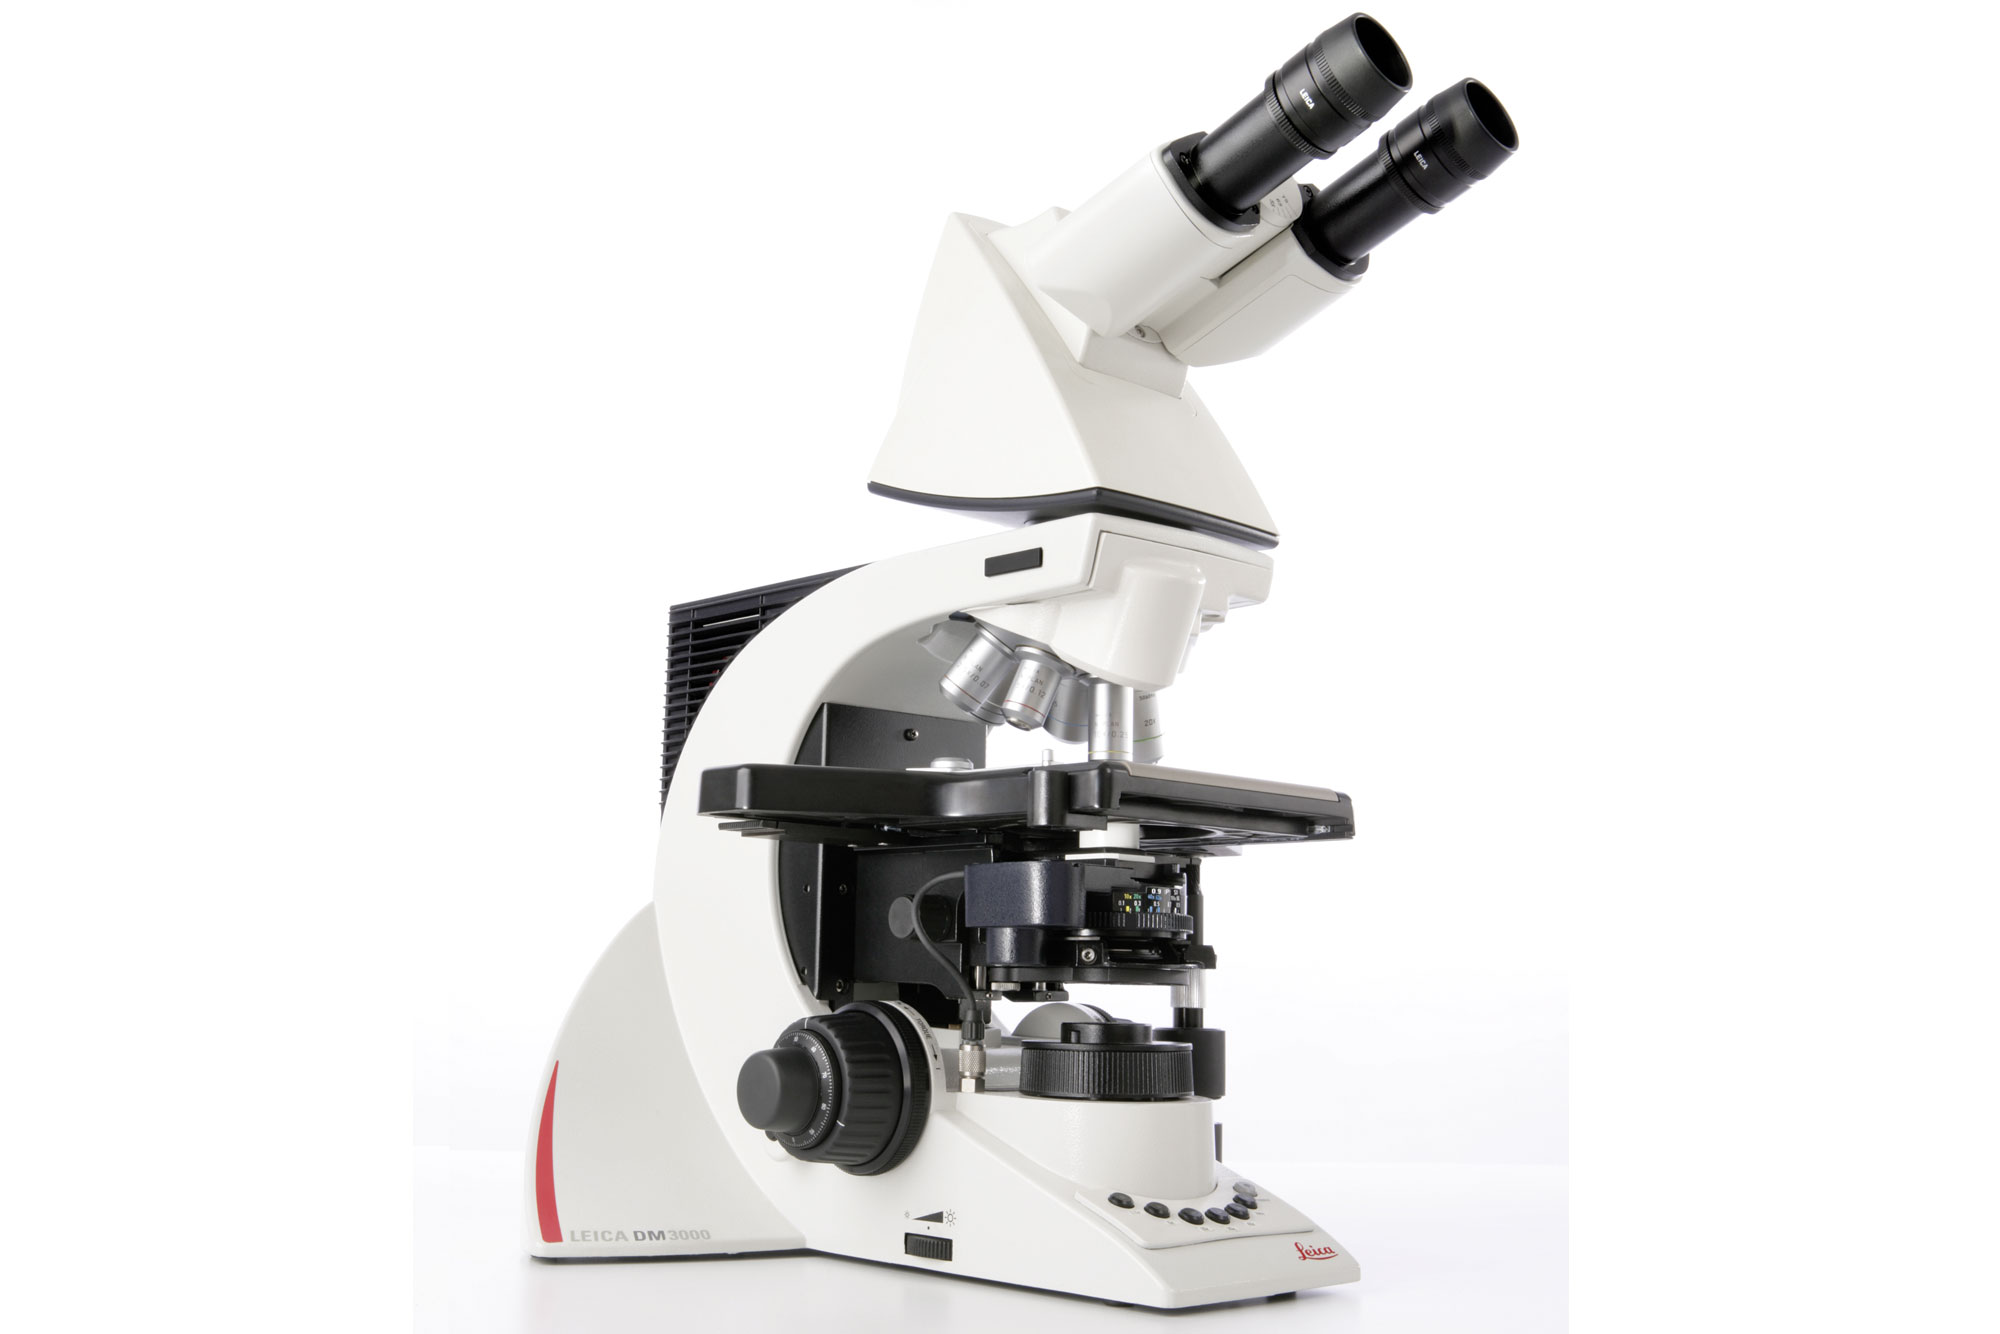 The Uses of microscopes